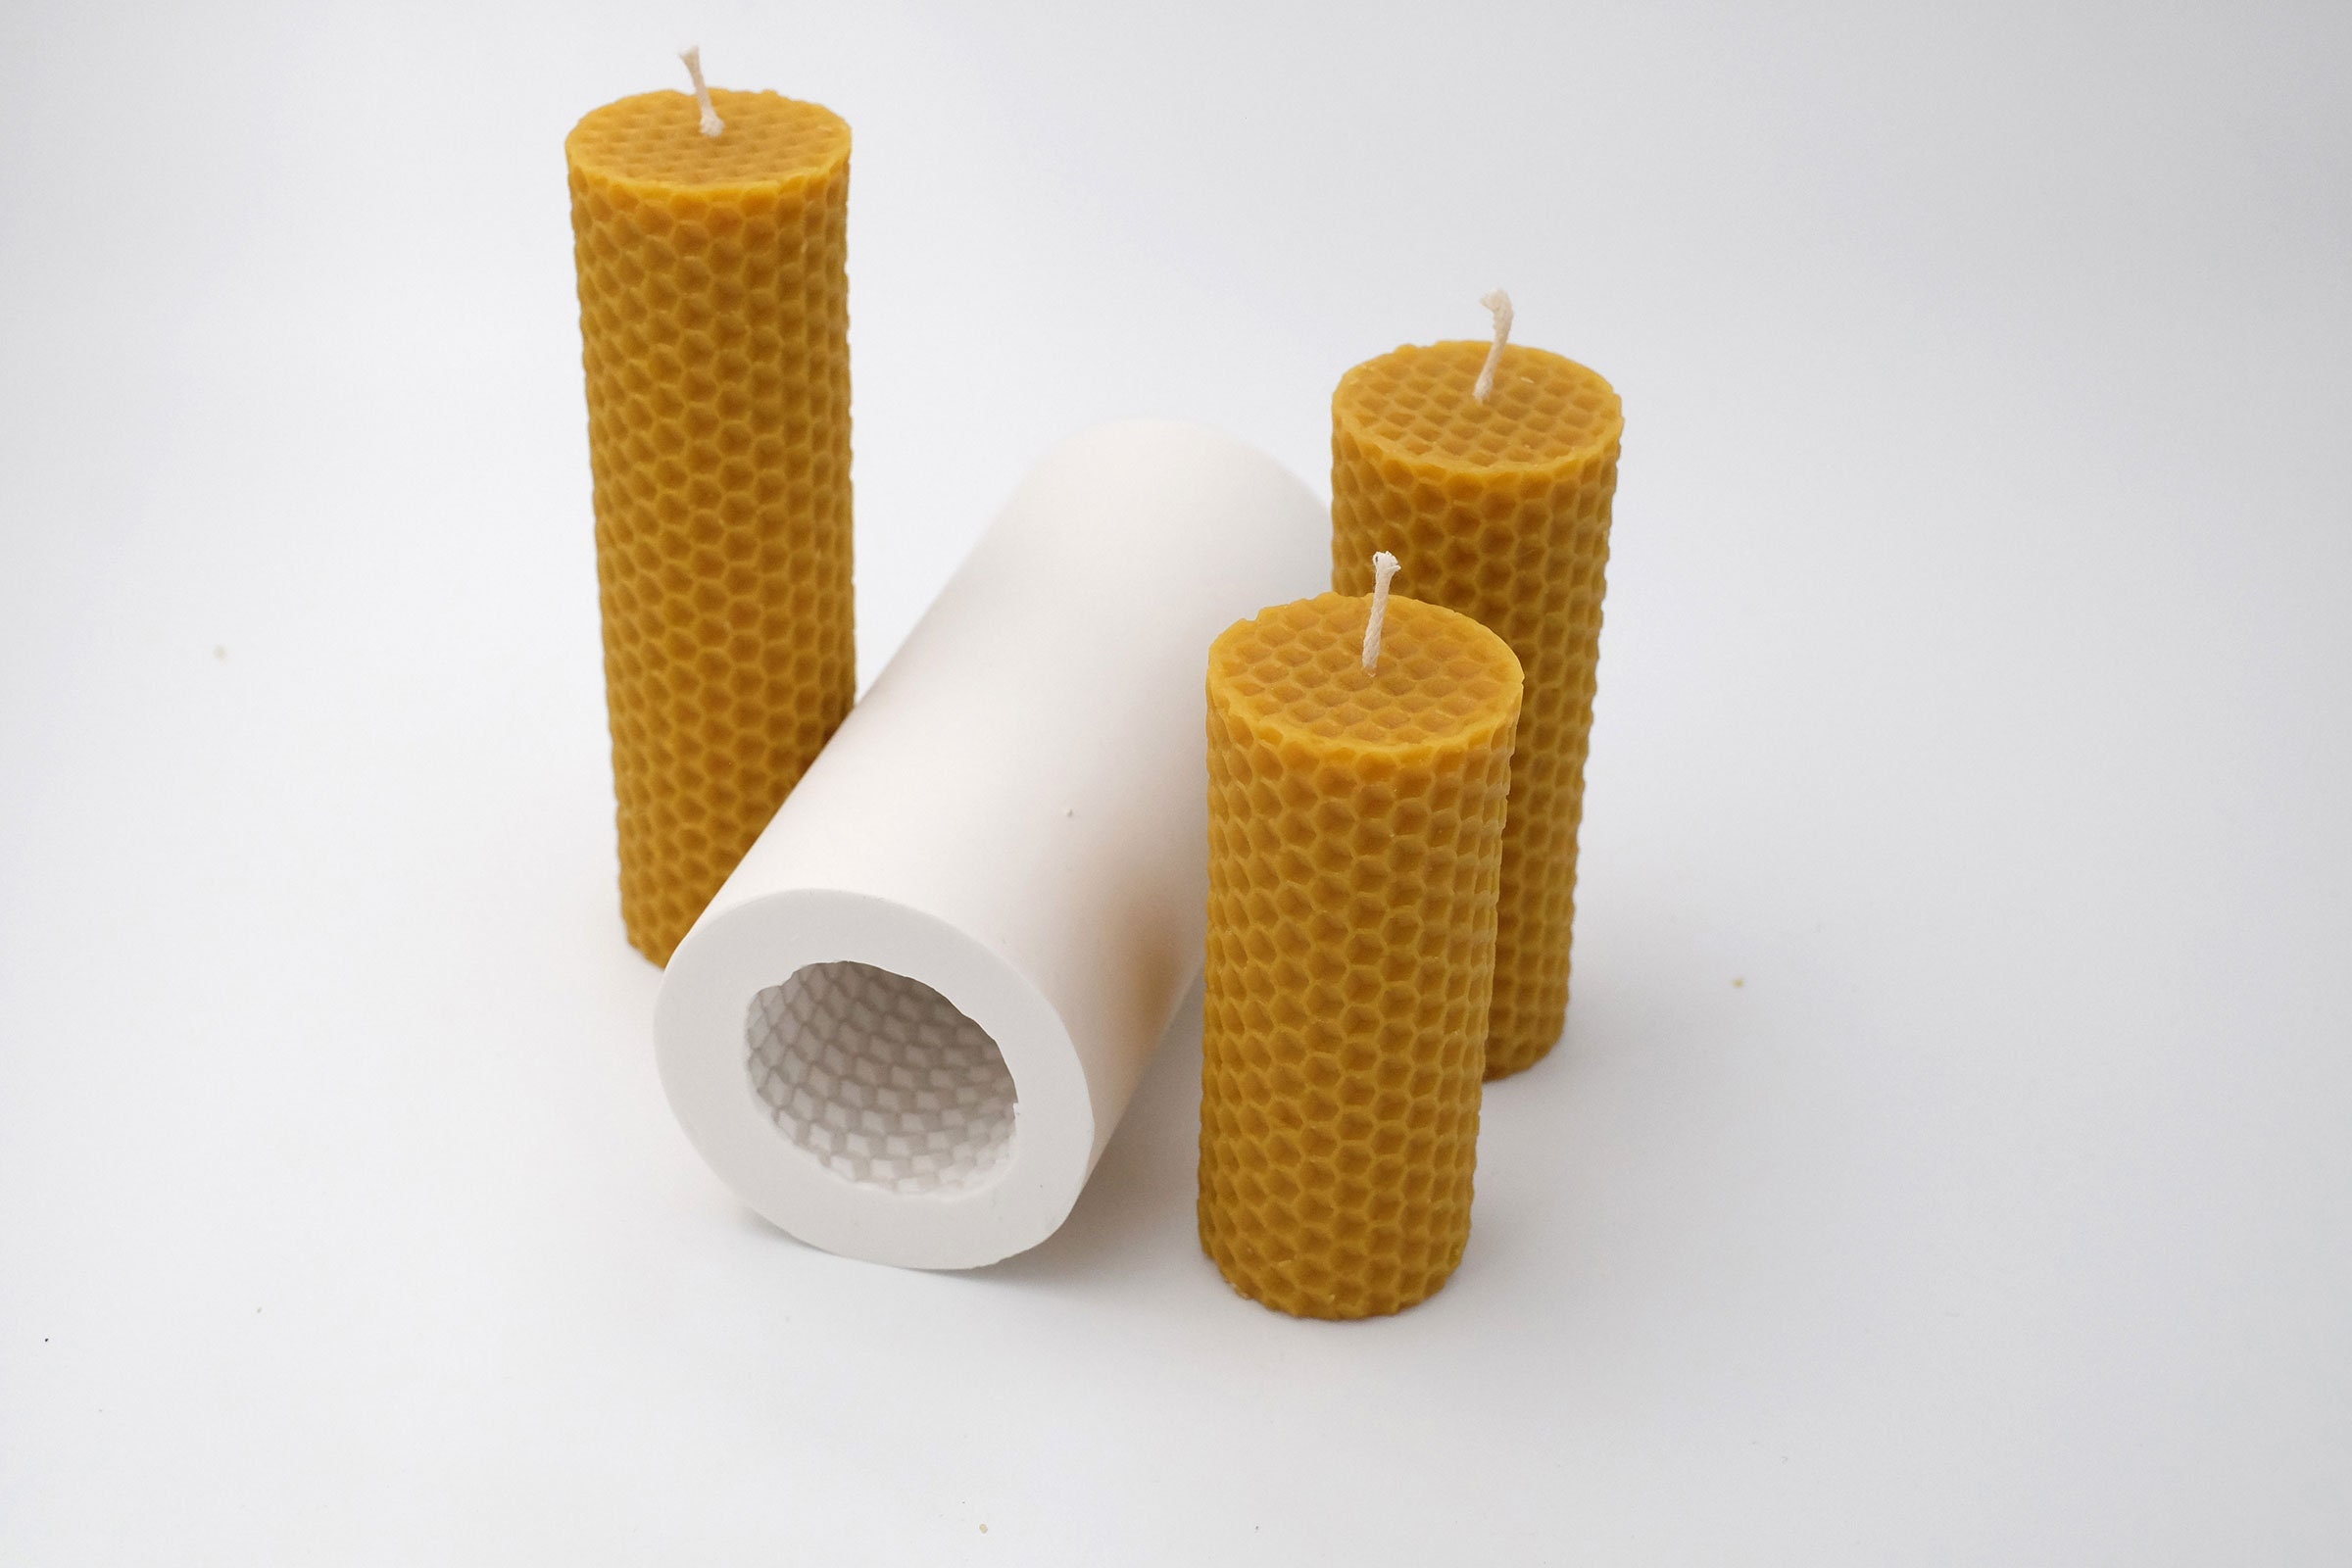 Honeycomb Pillar Silicone Candle Mold | Betterbee